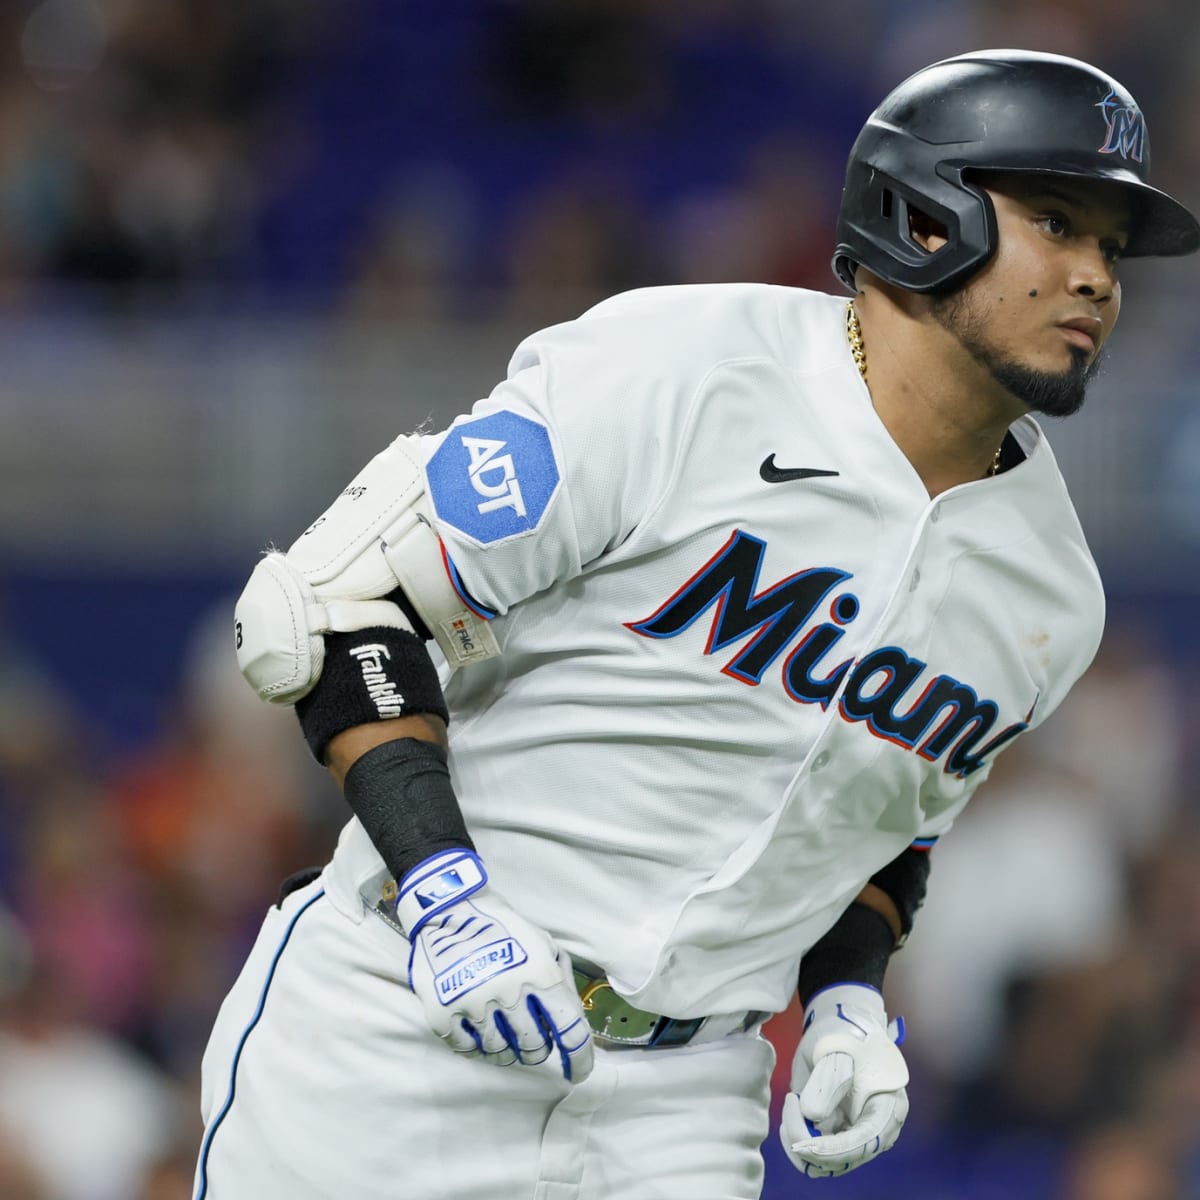 MLB Trade Reaction: The Marlins overpaid for Luis Arraez - Fish Stripes